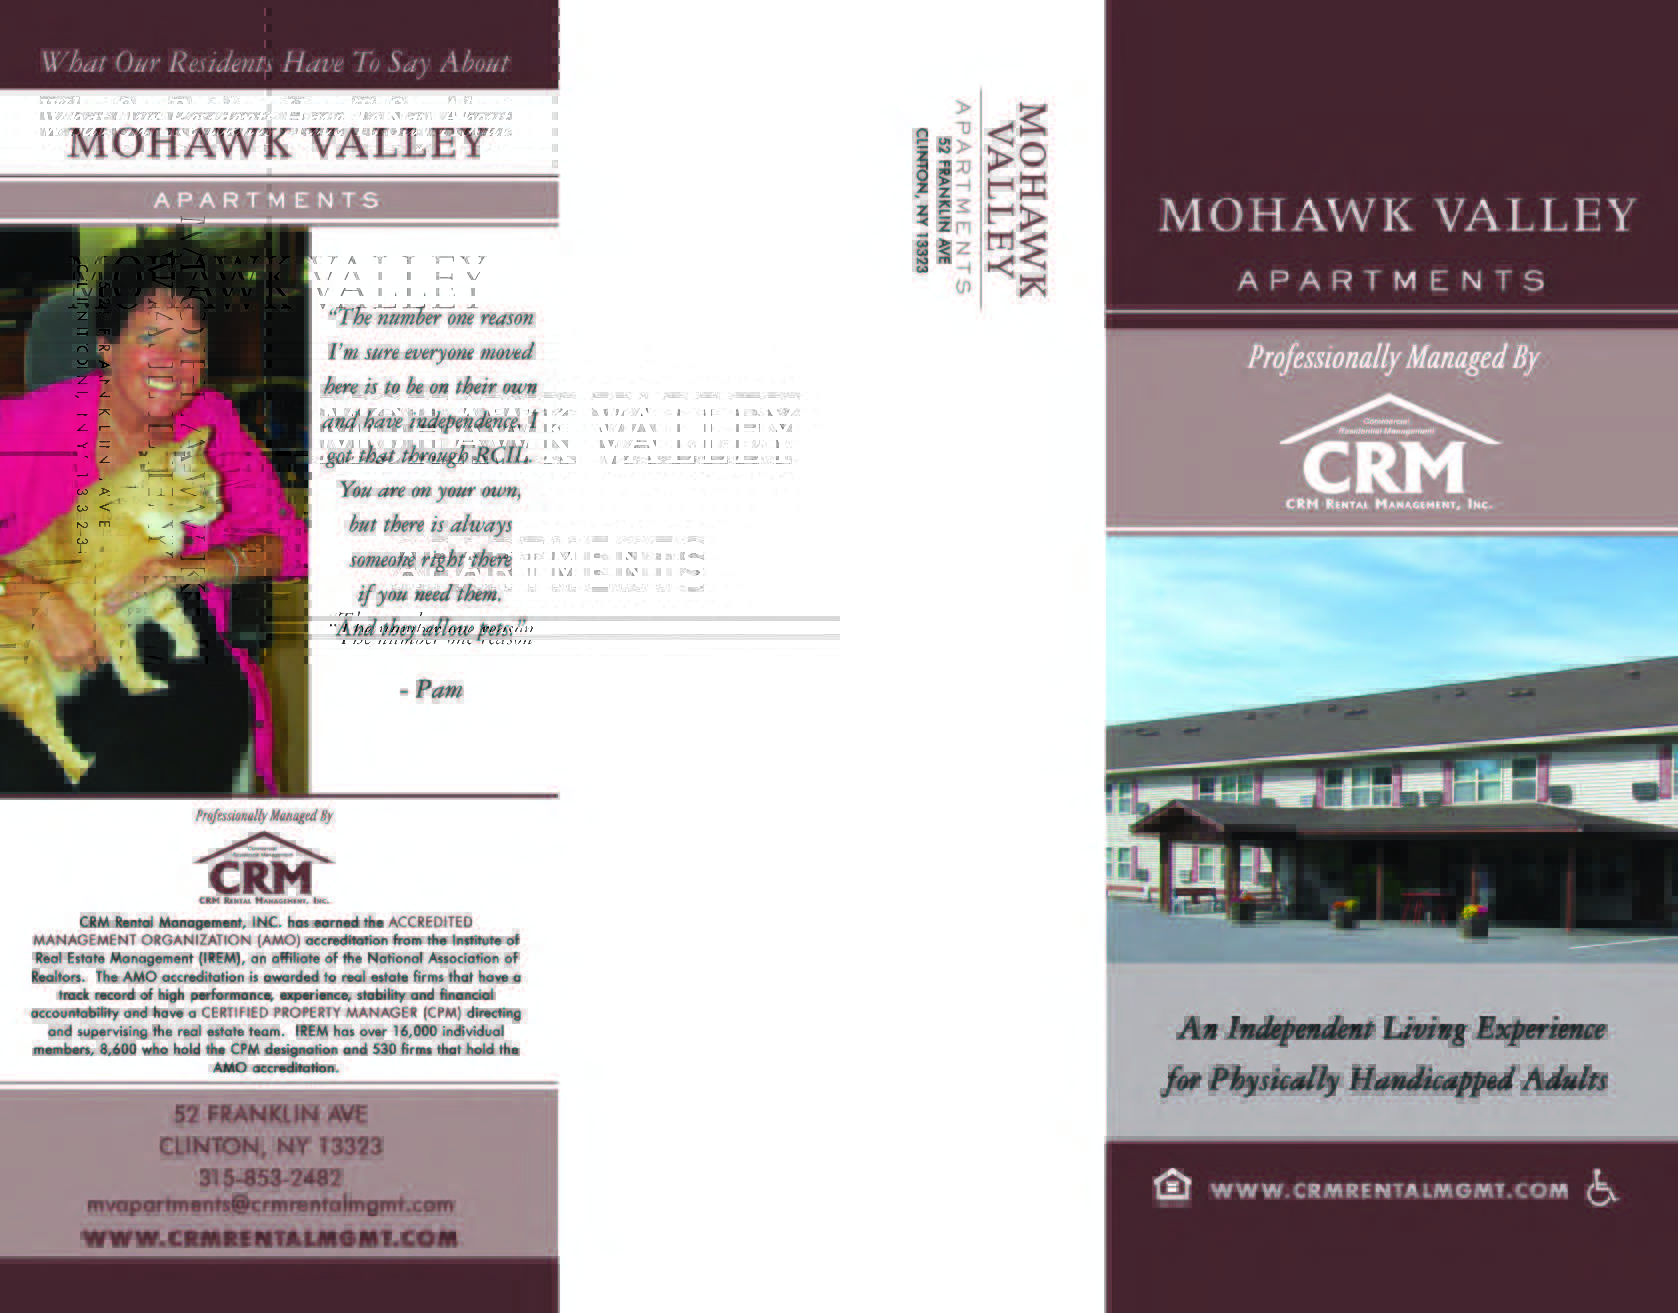 Mohawk Valley Brochure Page 1 of 2